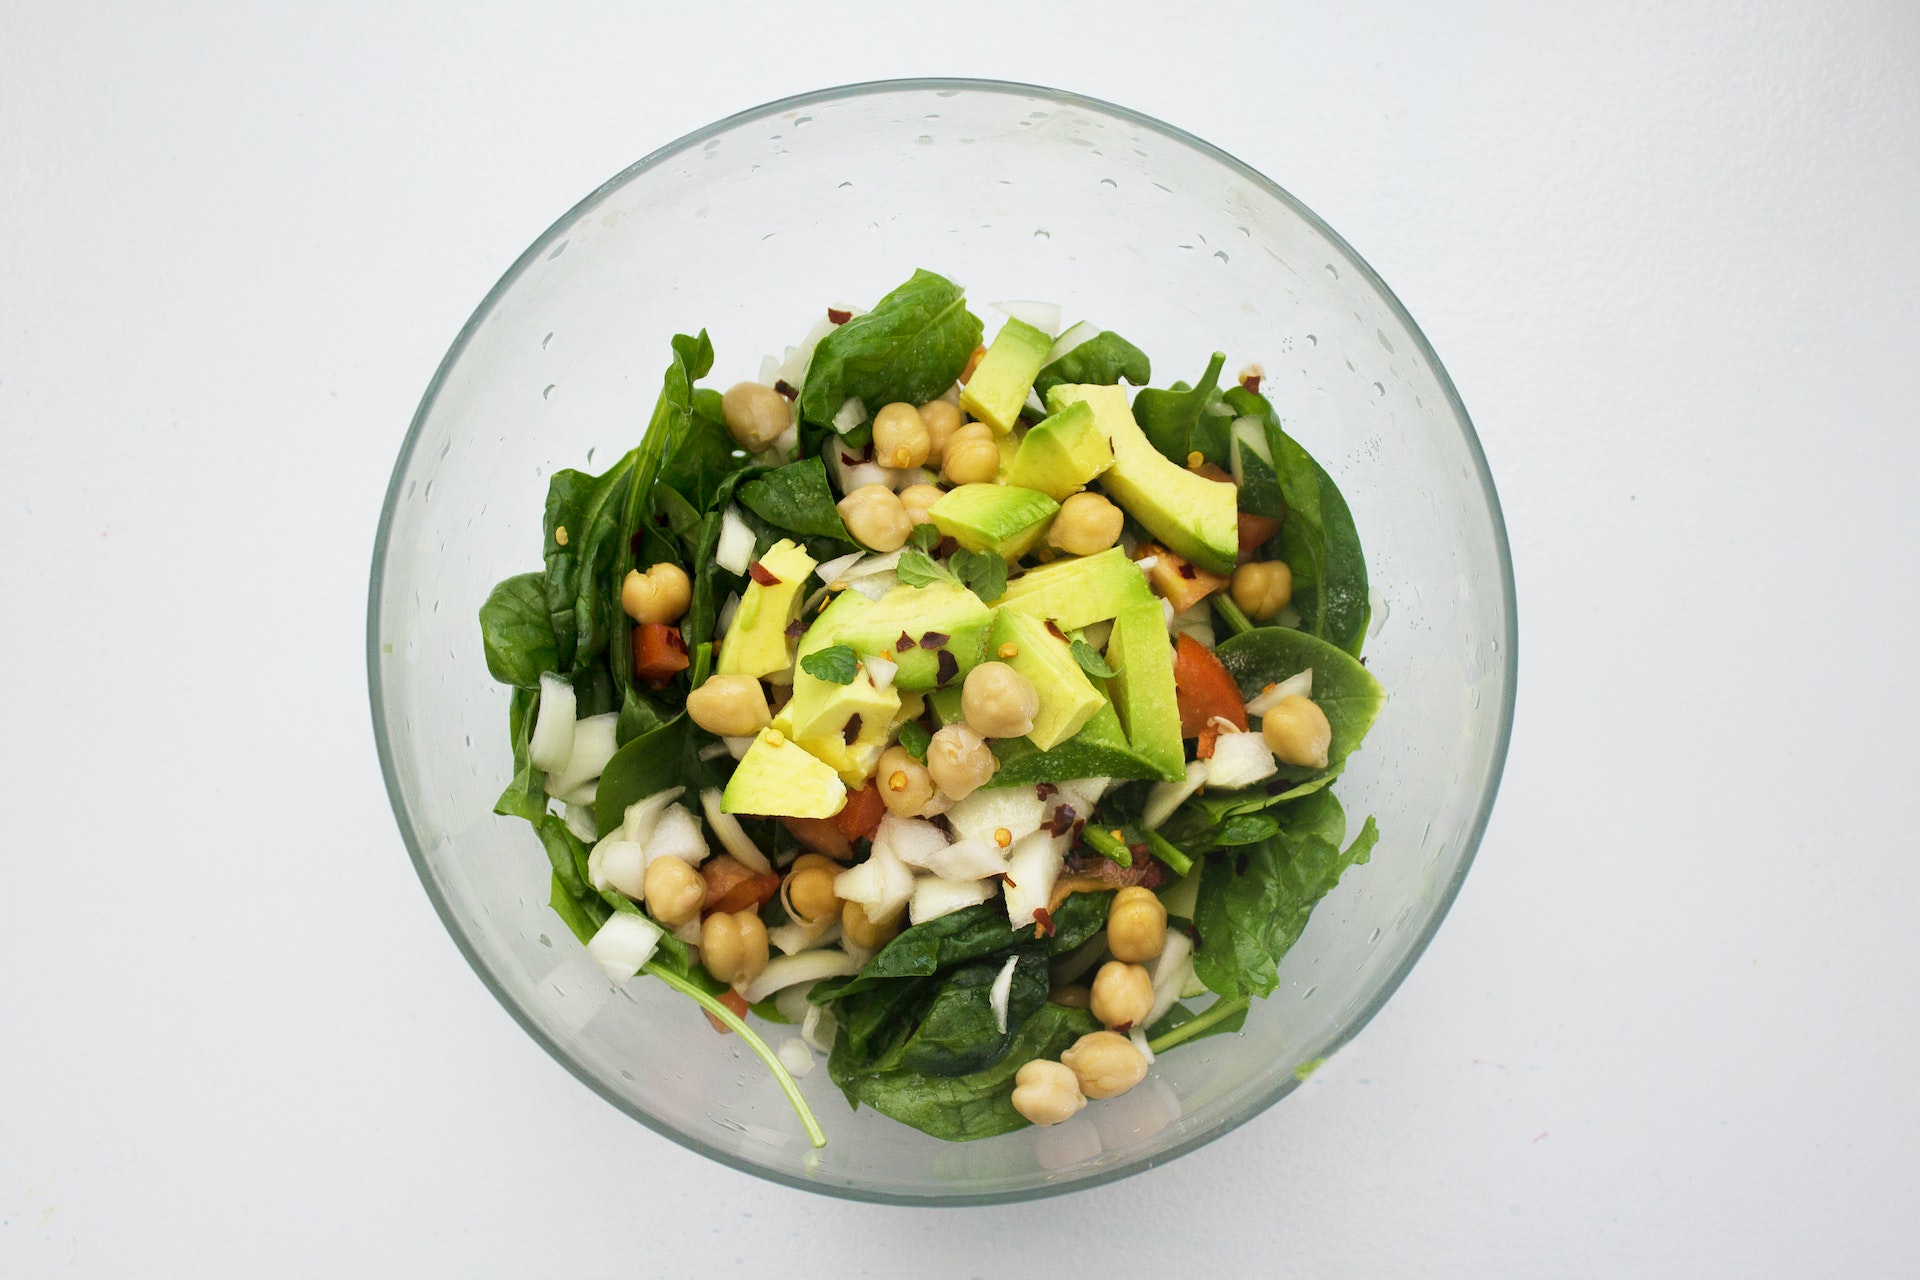 Top down view of chickpea salad